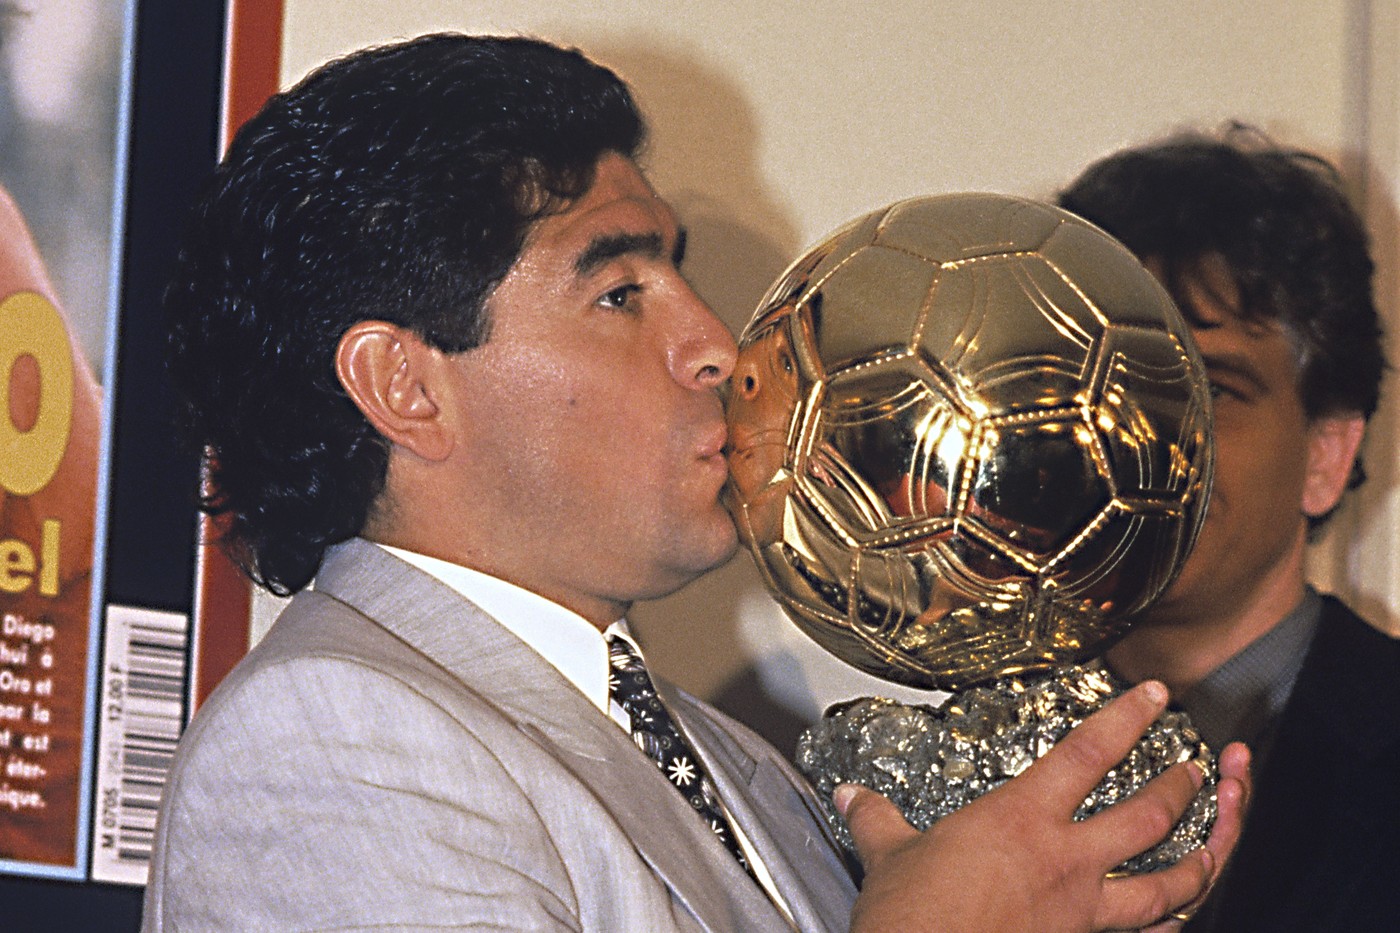 PARIS 1995 - DIEGO MARADONA RECOIT LE BALLON D'OR//GELYPATRICK_18300003/2011251832/Credit:PATRICK GELY/SIPA/2011251833,Image: 571267812, License: Rights-managed, Restrictions: , Model Release: no